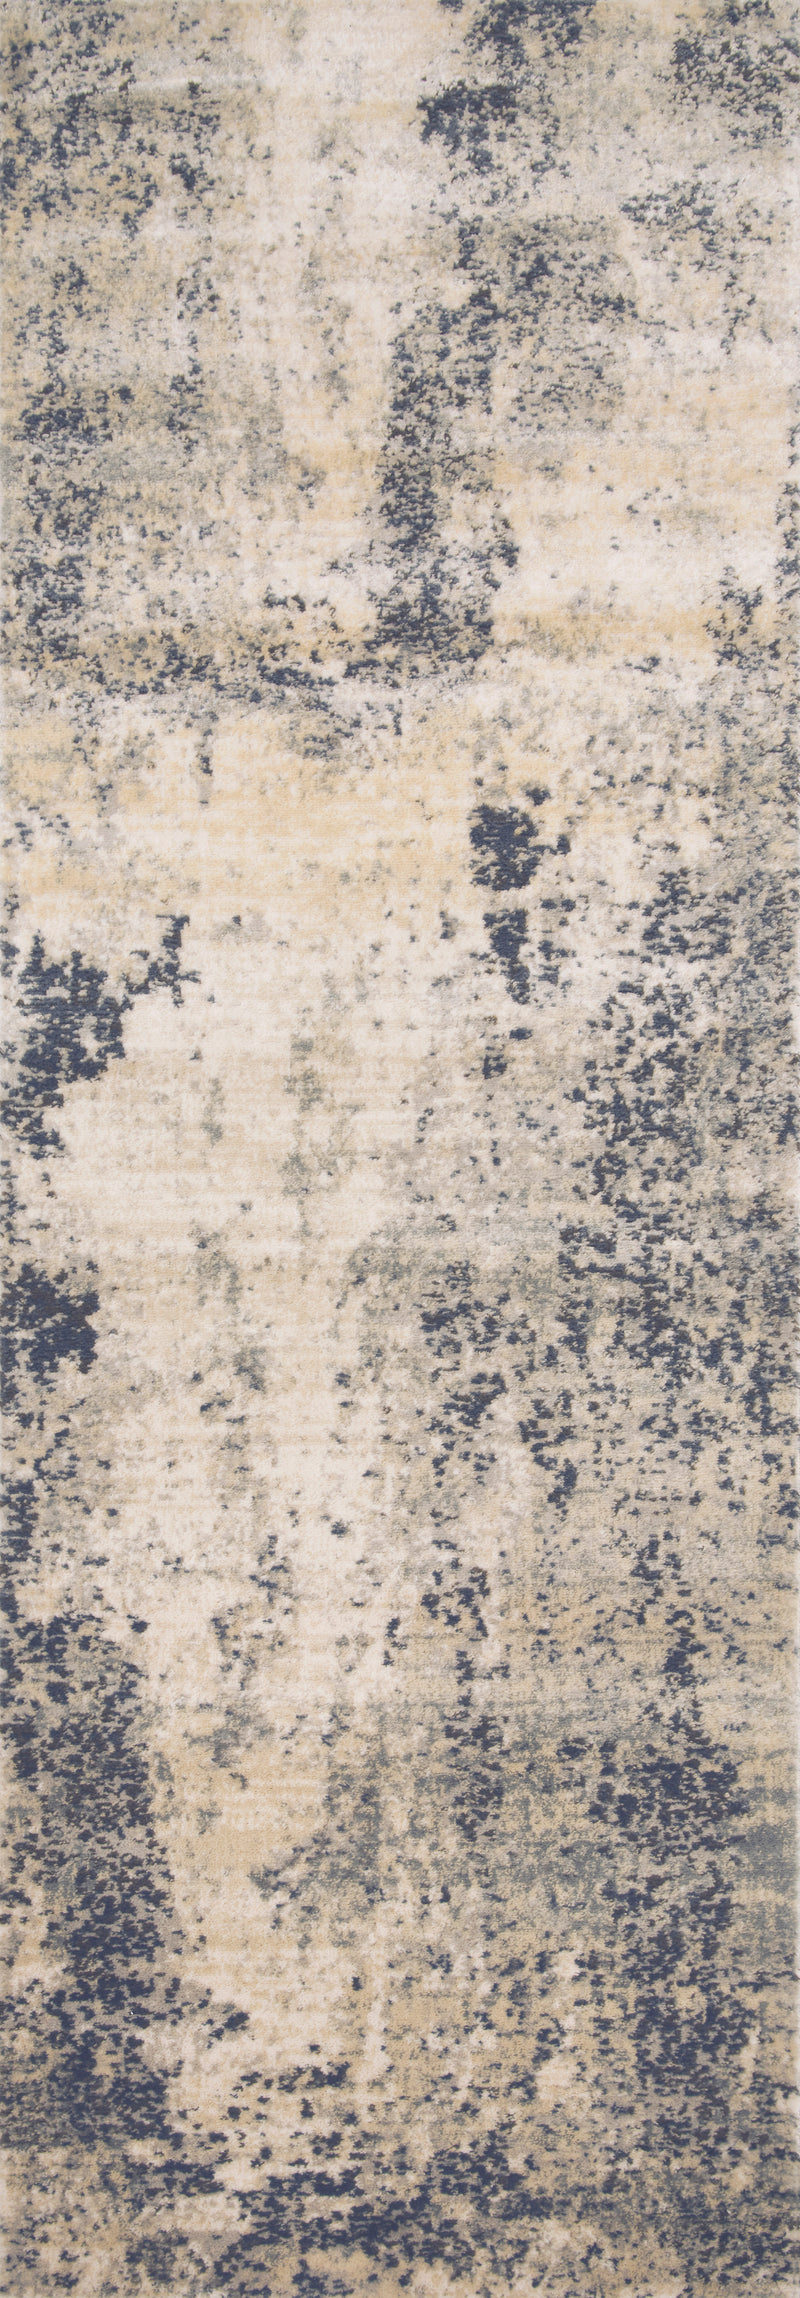 media image for Teagan Rug in Natural / Denim by Loloi II 268